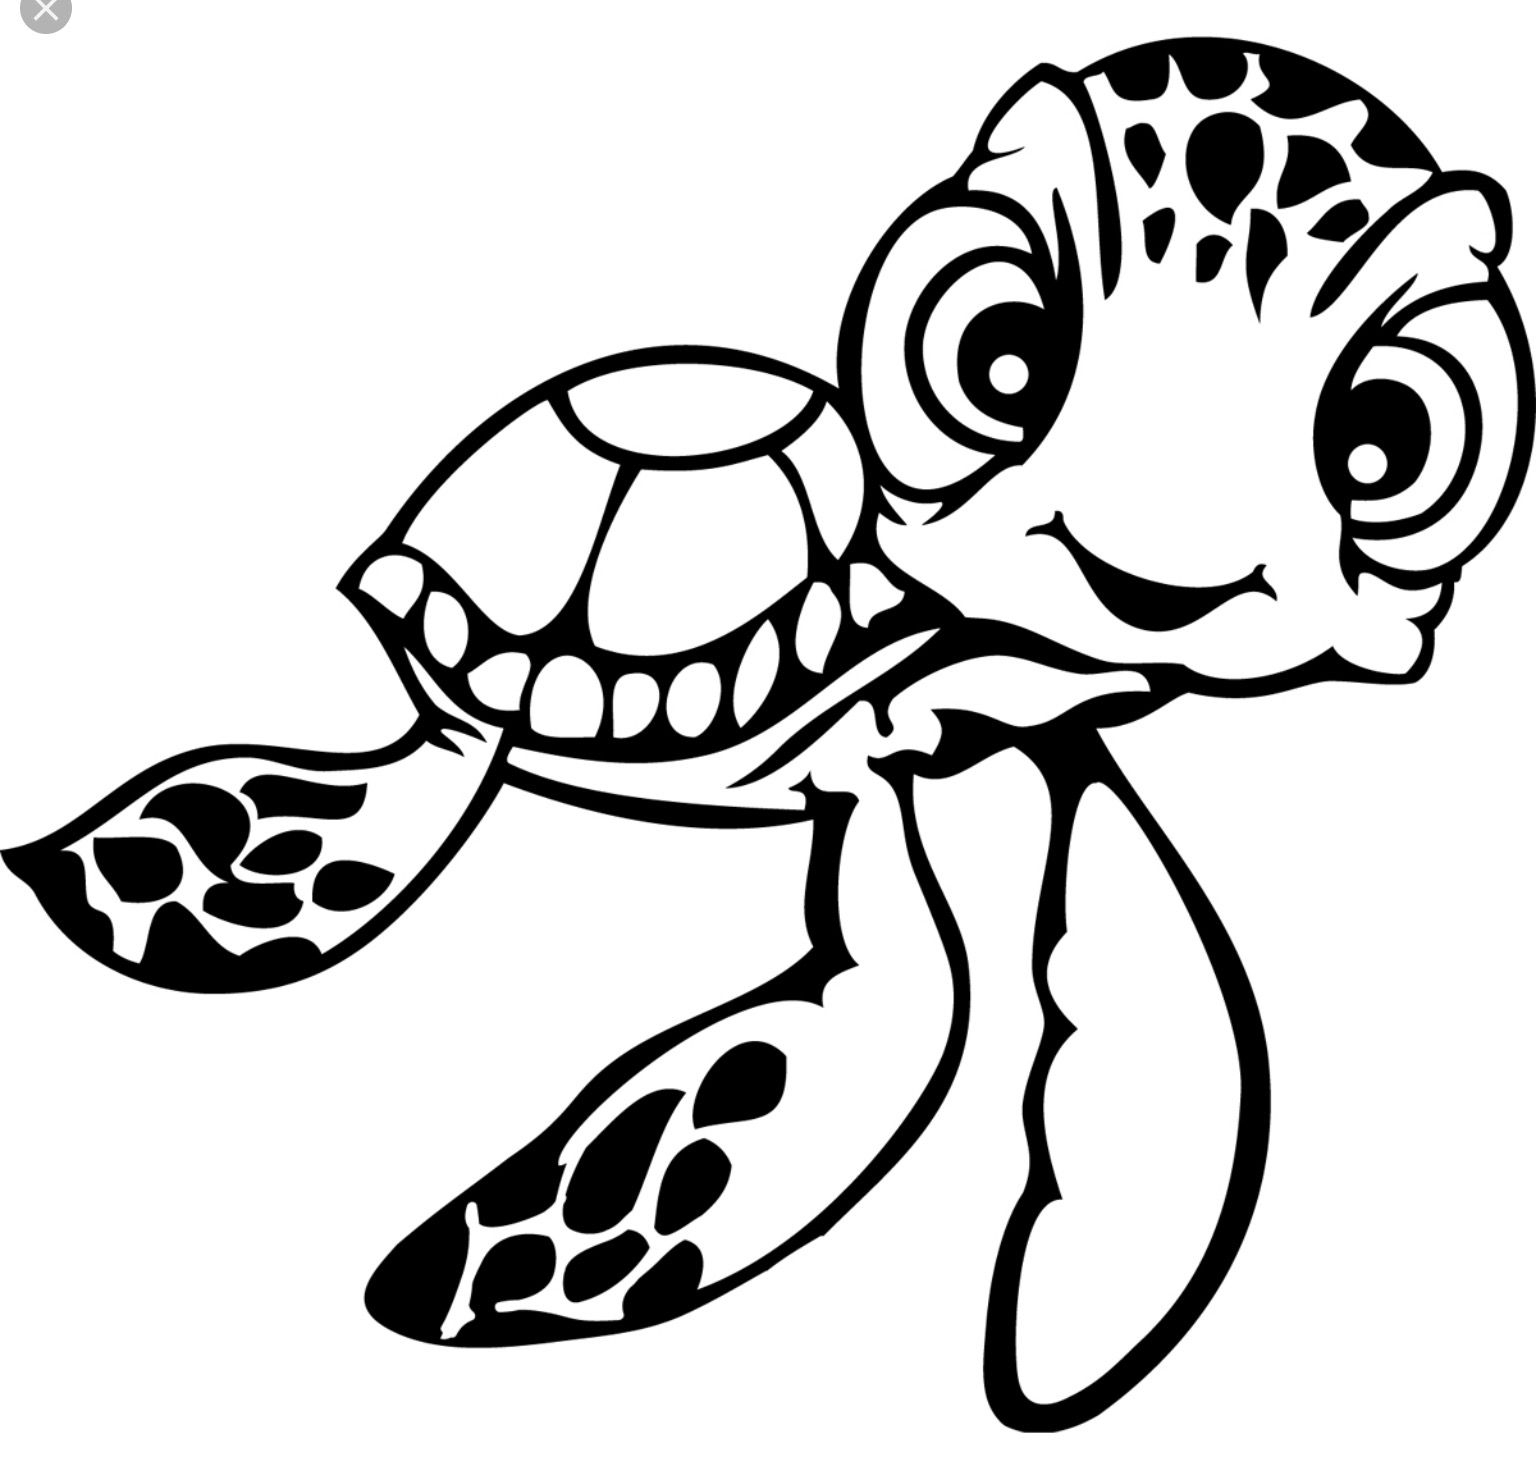 Turtle Coloring Pages For Kids - Visual Arts Ideas